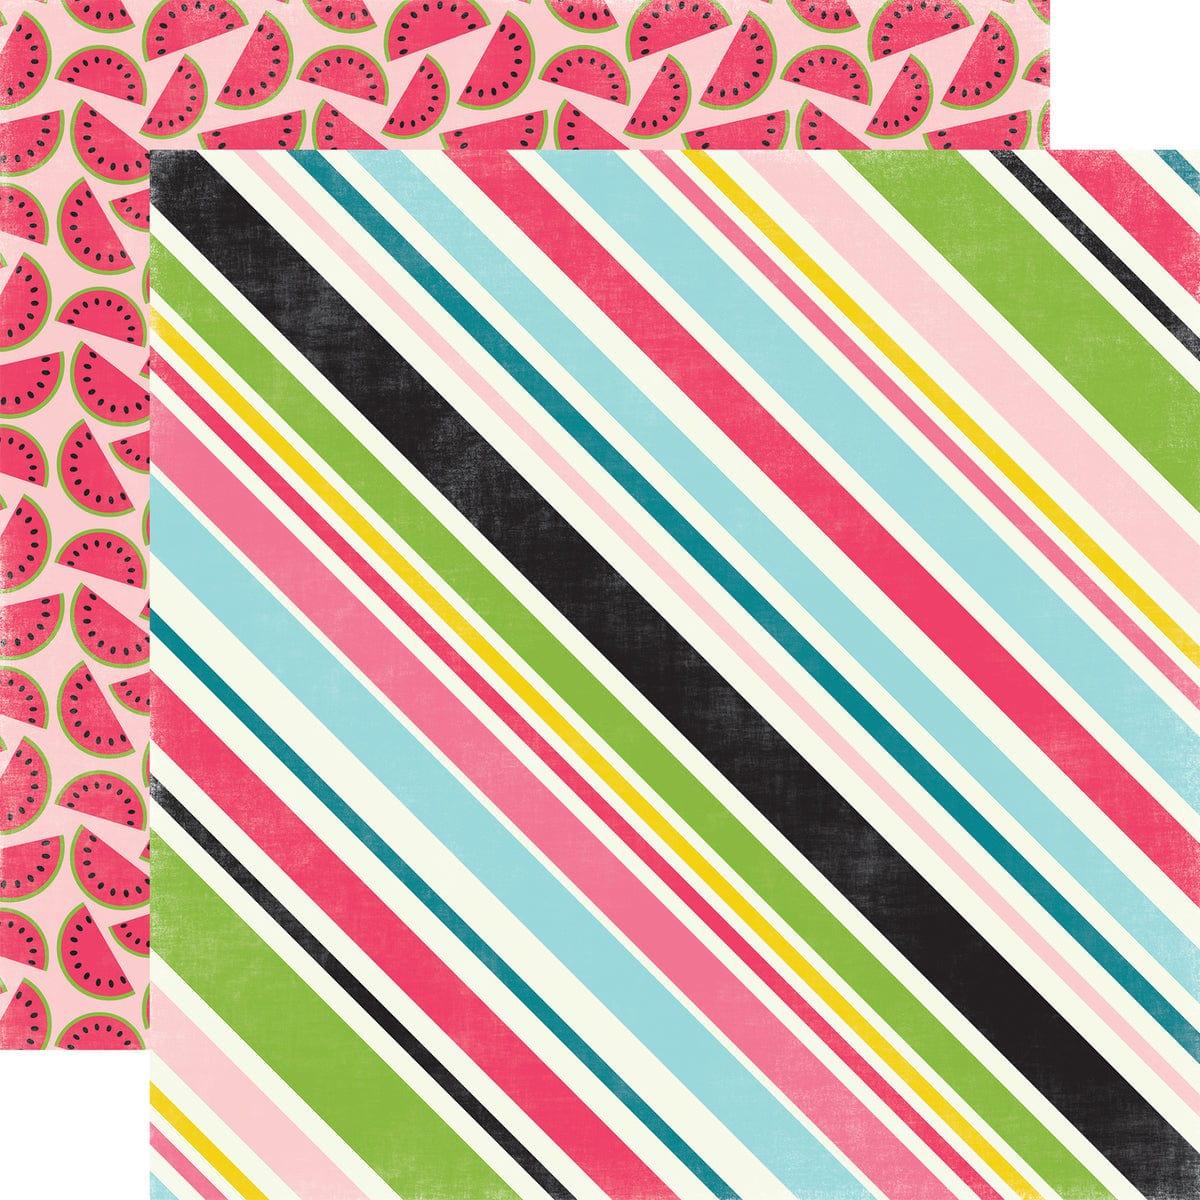 Summer Fun Collection Sweet Stripes 12 x 12 Double Sided Scrapbook Paper by Echo Park Paper - Scrapbook Supply Companies